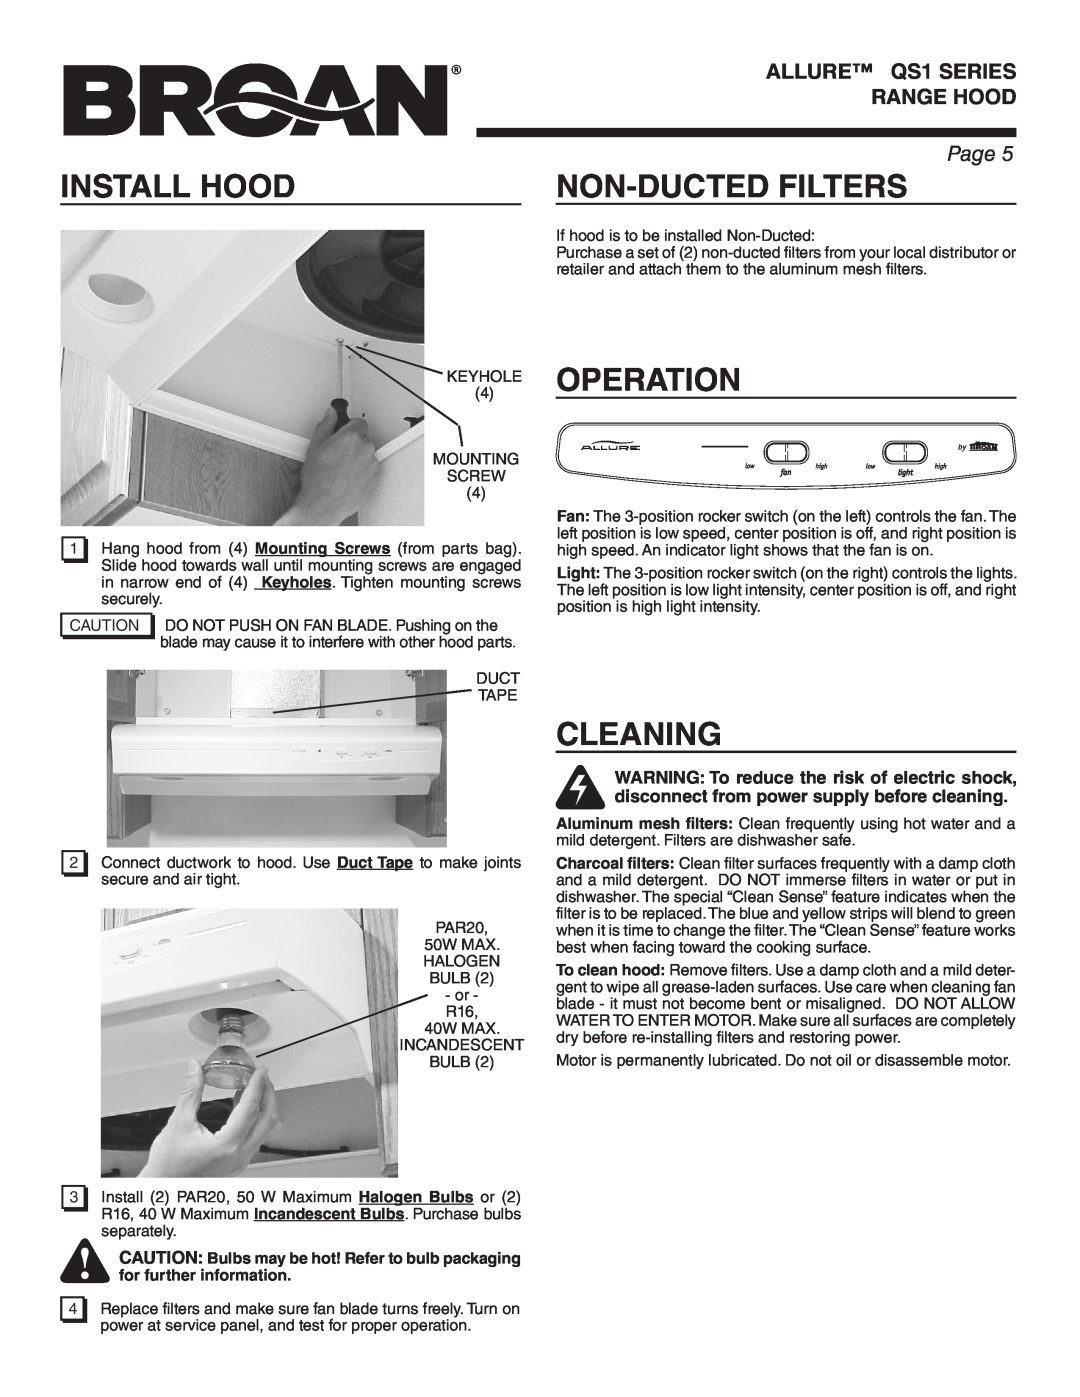 Broan QS130SS manual Install Hood, Non-Ducted Filters, Operation, Cleaning, ALLURE QS1 SERIES RANGE HOOD, Page 